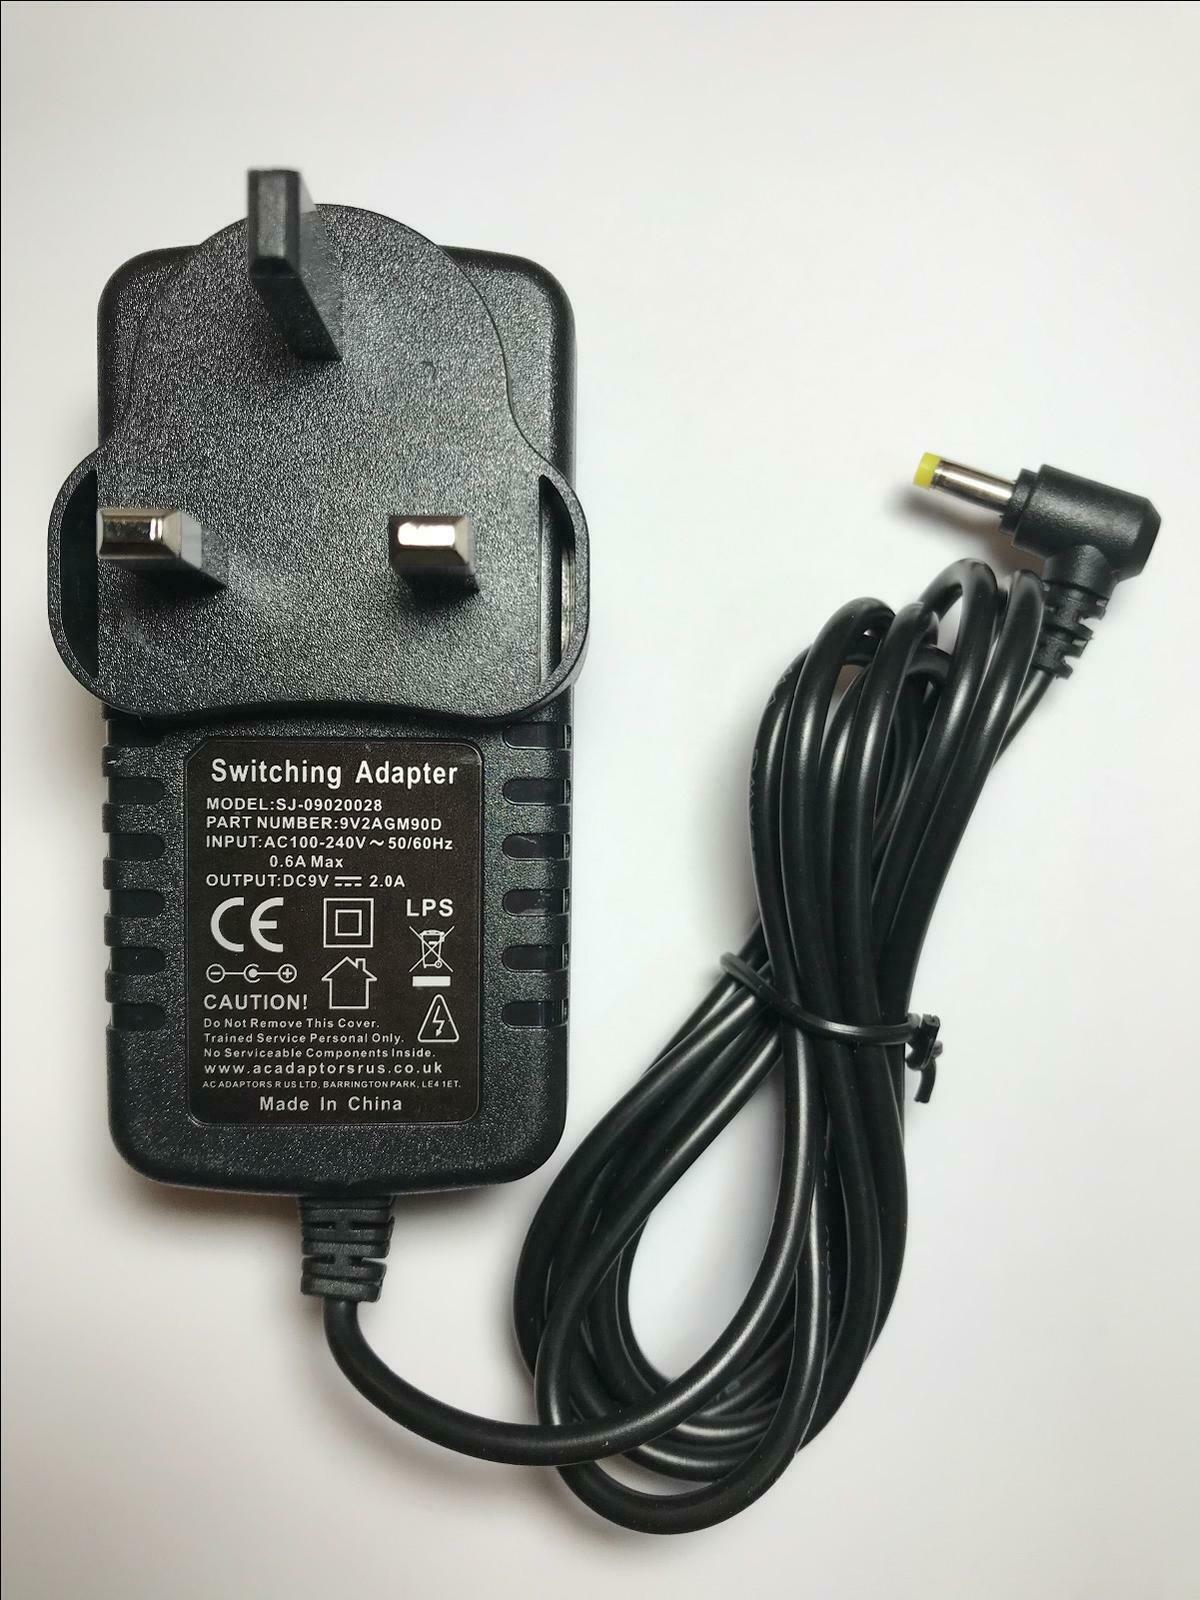 9V 2.2A AC-DC Switching Adapter Charger 4 Philips PET1030/05 Portable DVD Player Manufacturer warranty: 1 year MPN: